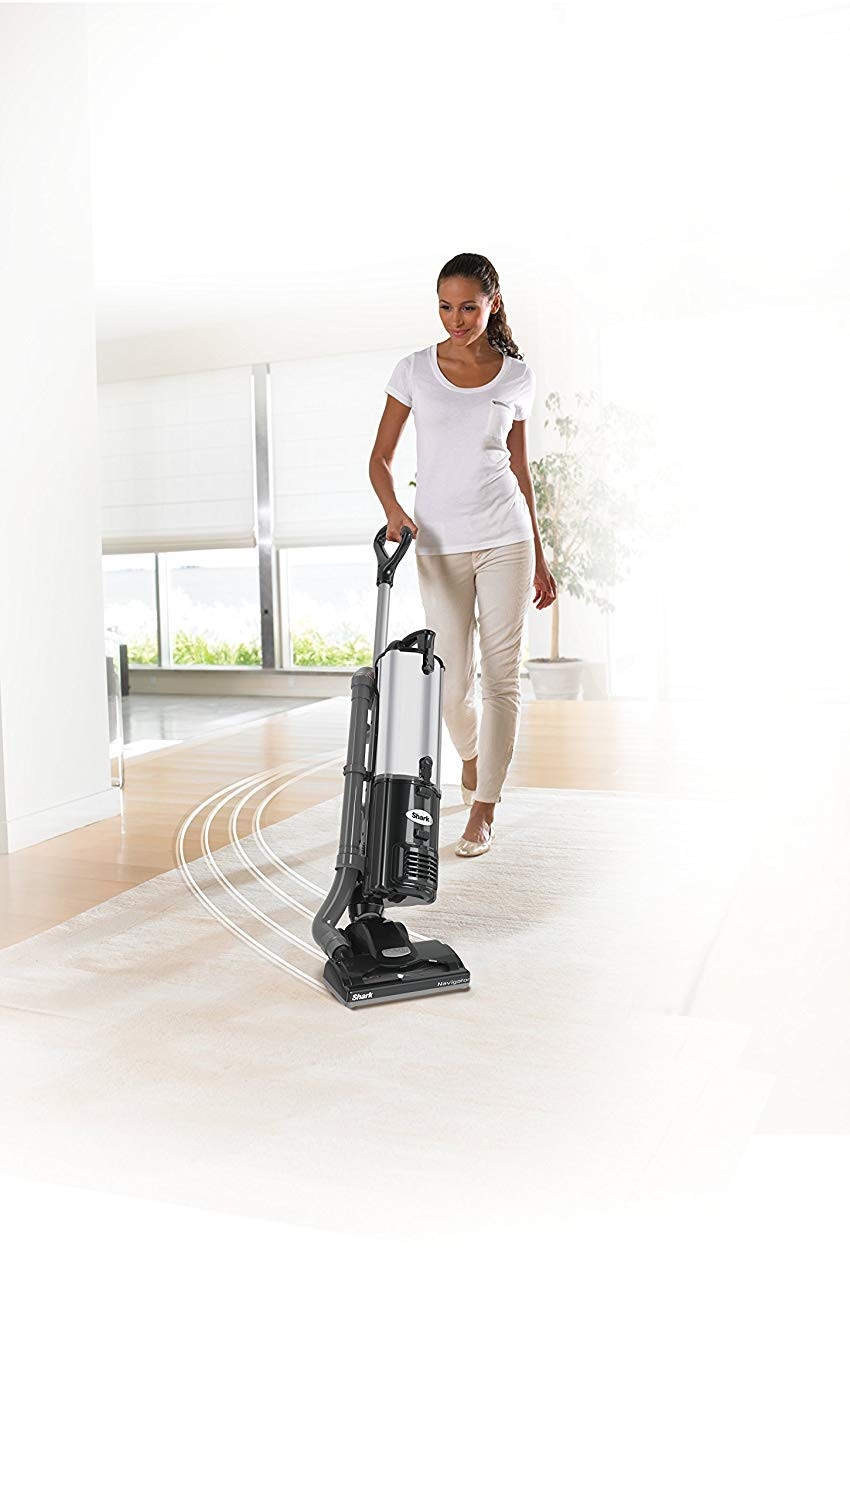 12 Lovable Hardwood Floor Vacuum and Steam Cleaner Reviews 2024 free download hardwood floor vacuum and steam cleaner reviews of amazon com shark navigator upright corded bagless vacuum for amazon com shark navigator upright corded bagless vacuum lightweight large cap